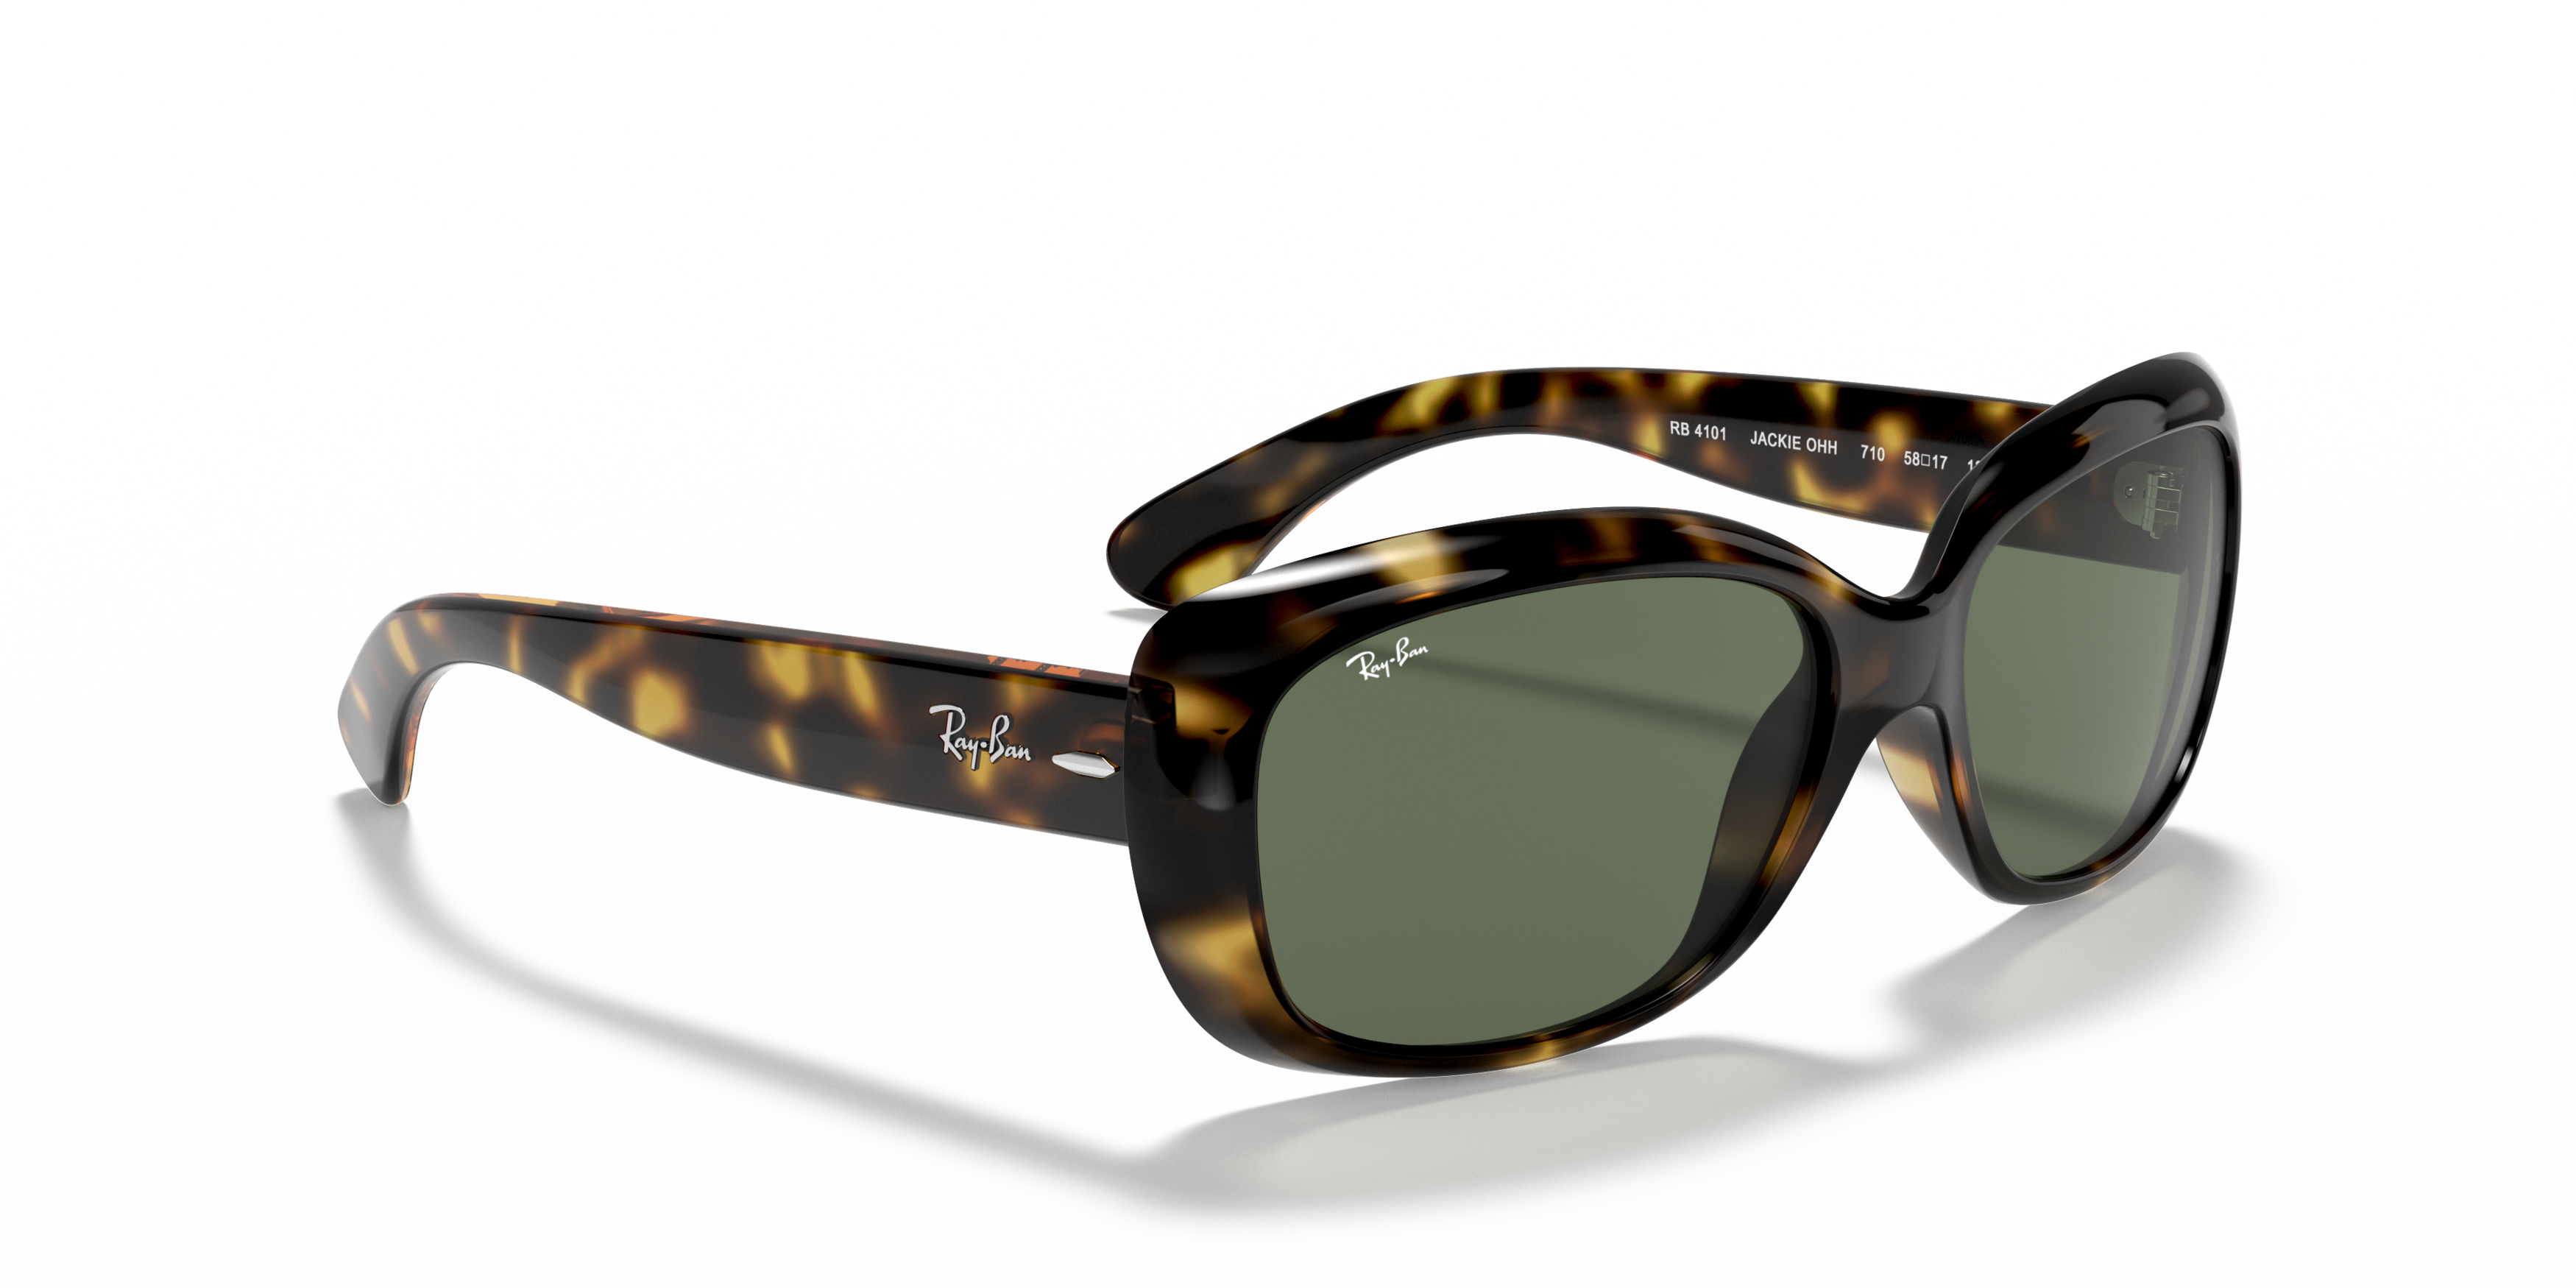 Angle_Right01 Ray-Ban Jackie Ohh RB 4101 Sunglasses Green / Tortoise Shell